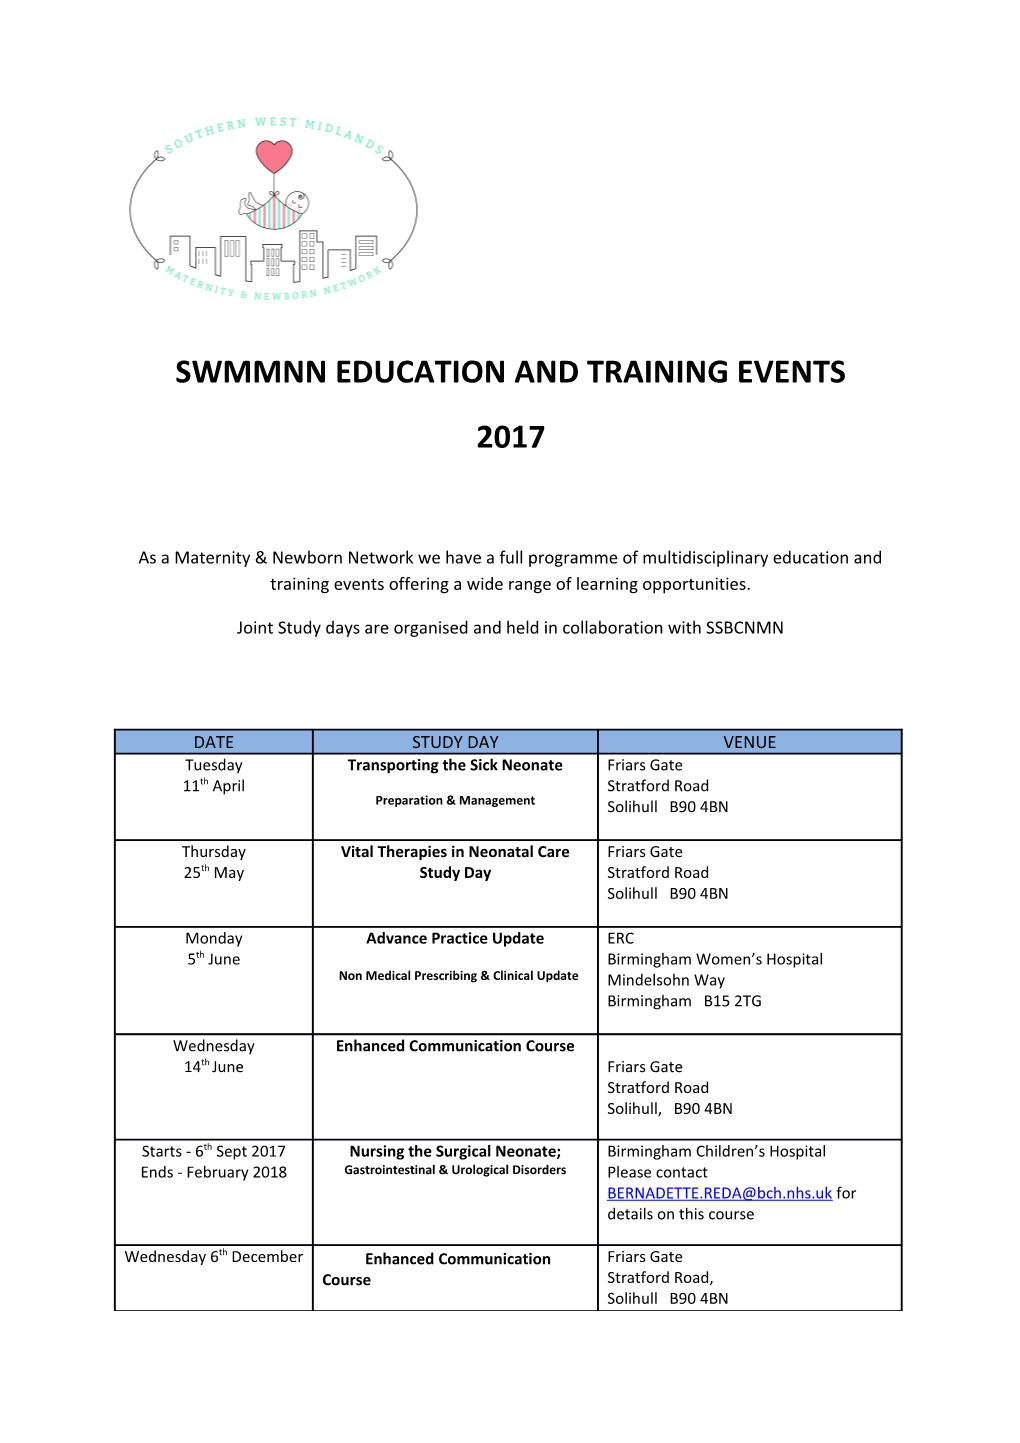 Swmmnn Education and Training Events